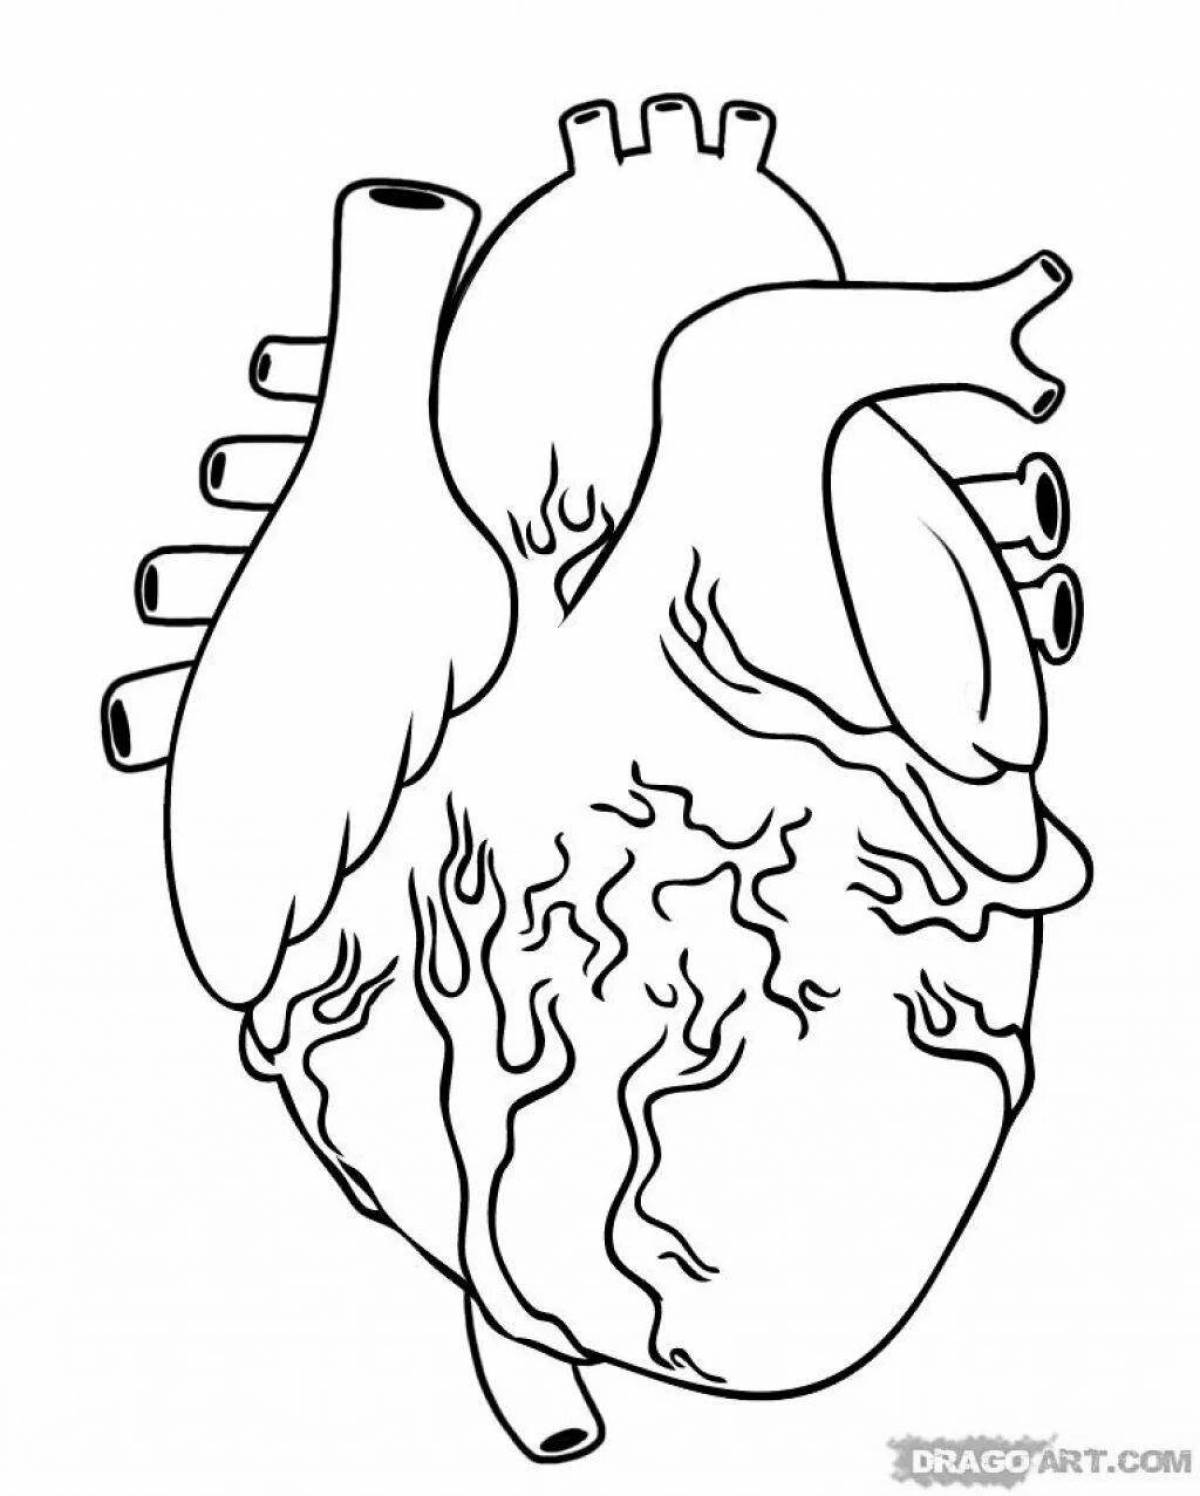 Lovely heart organ coloring book